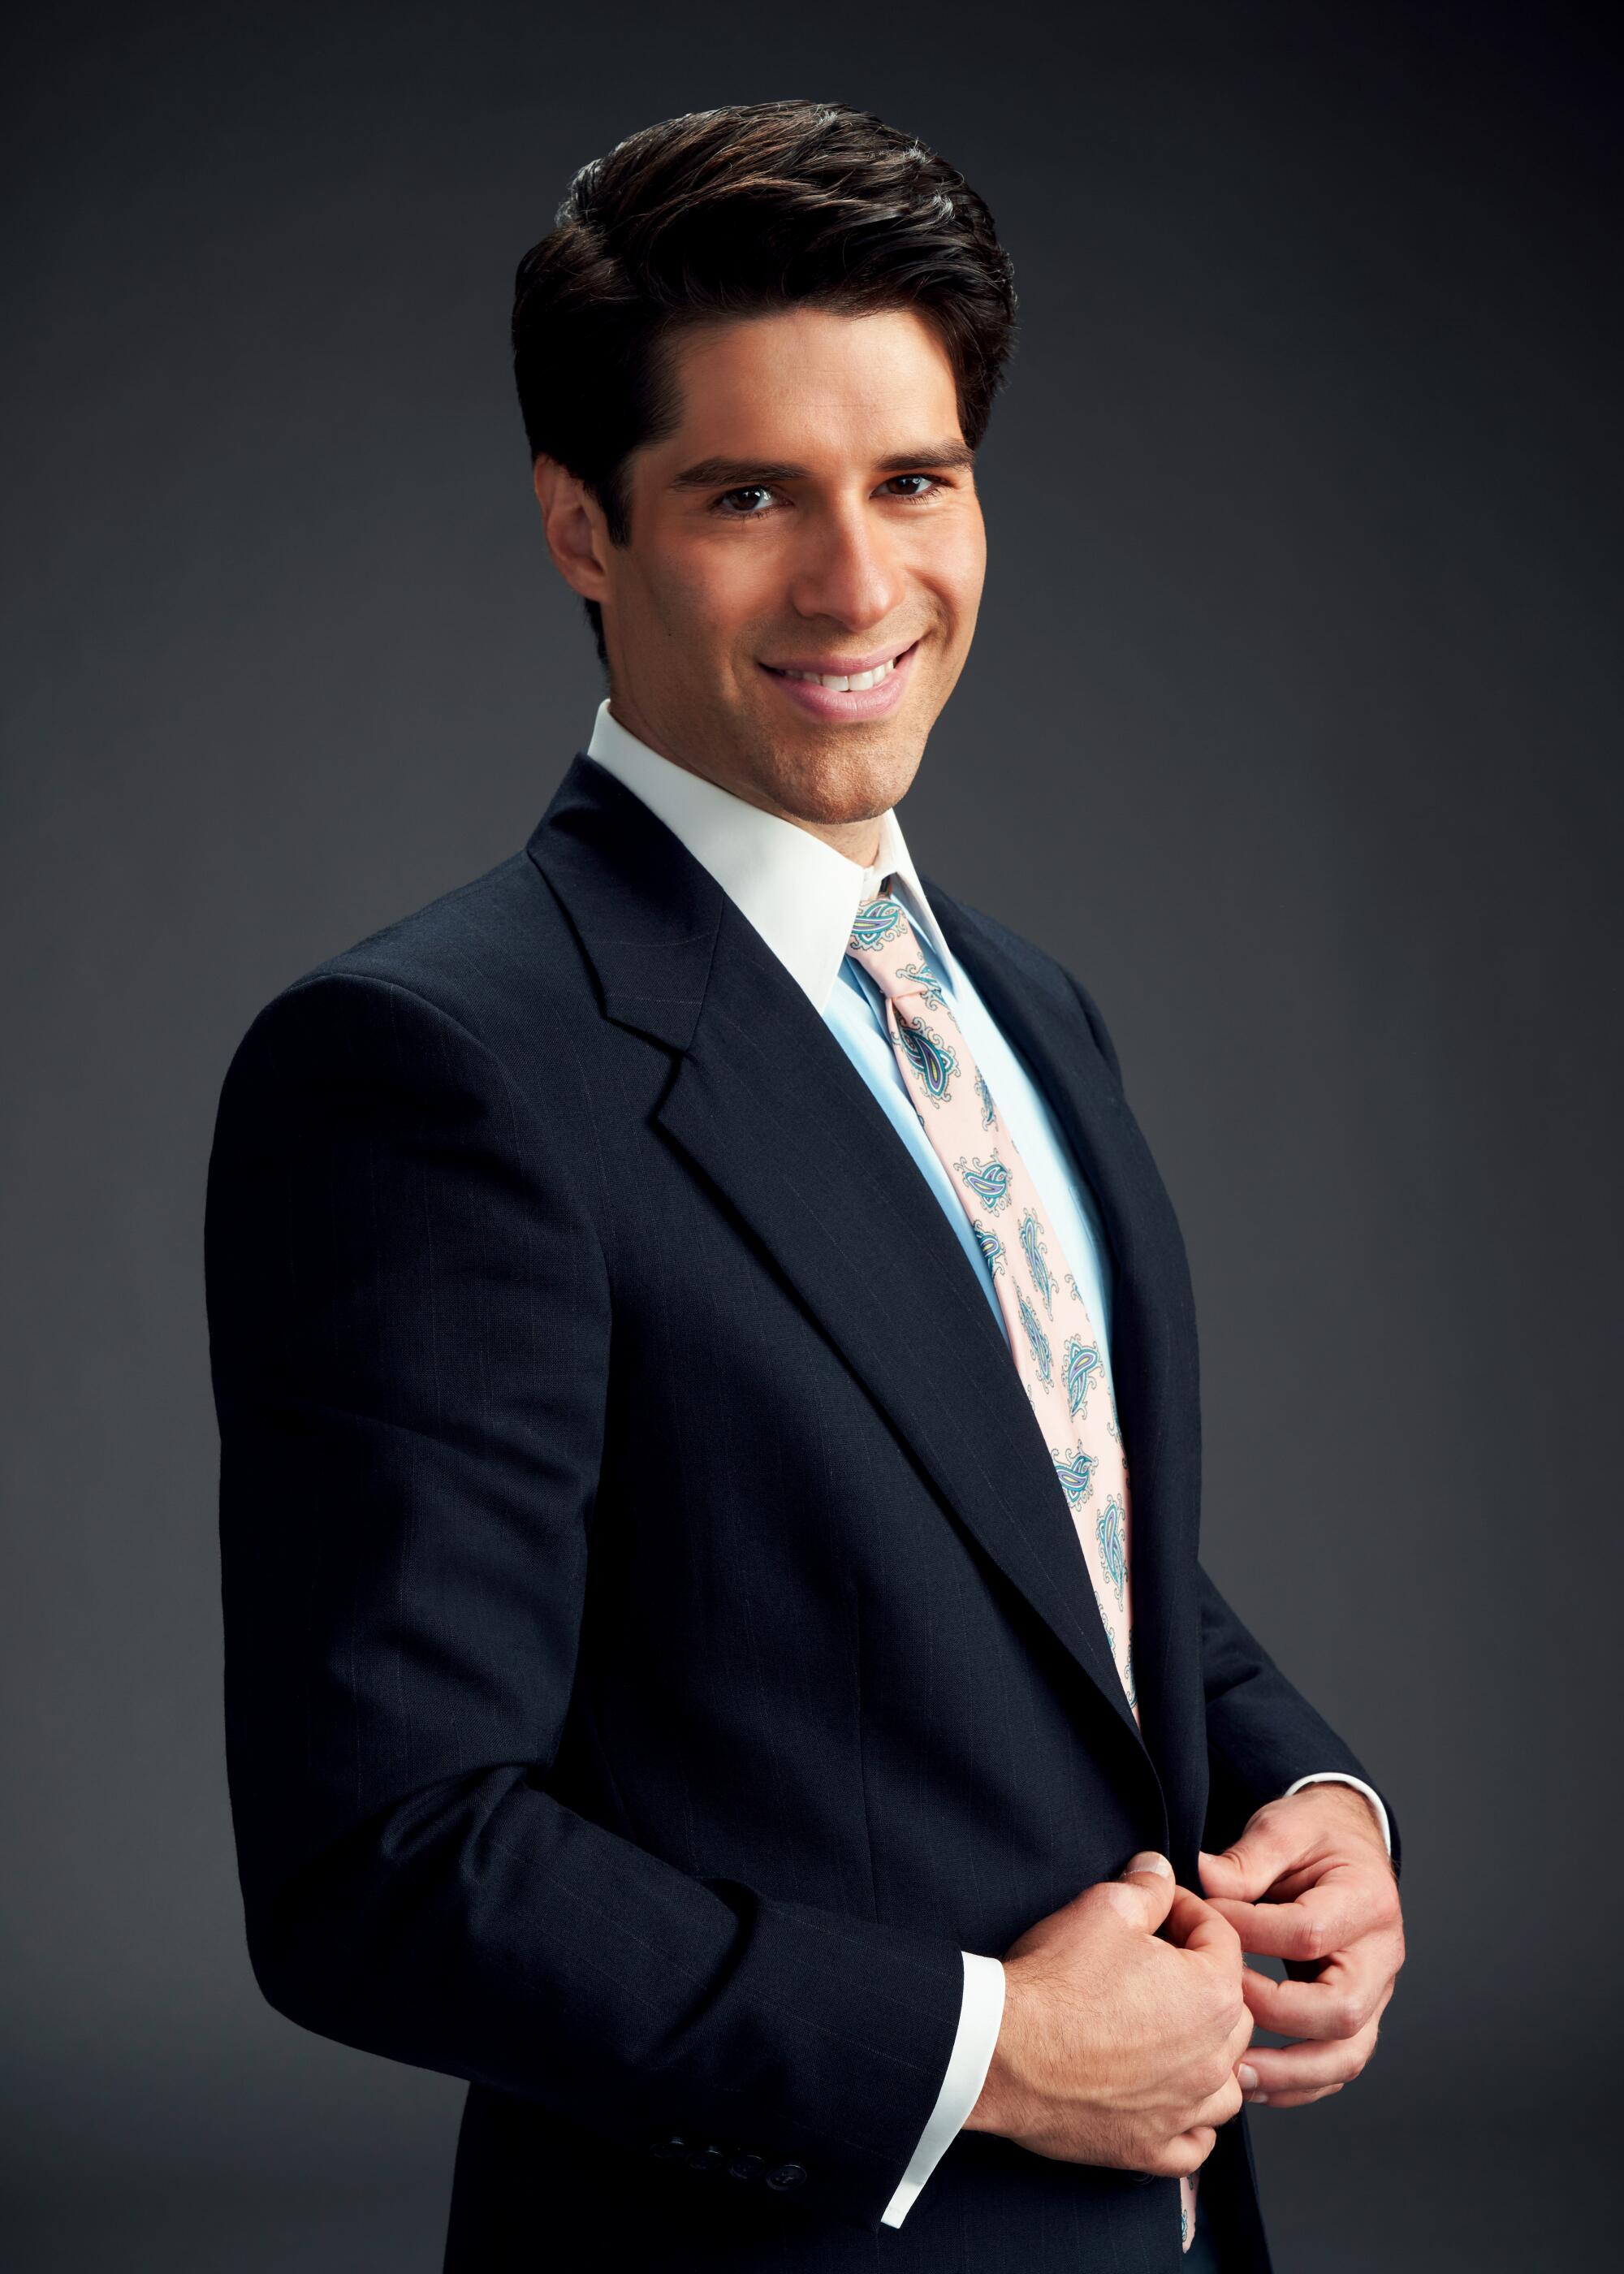 Asher Grodman as Trevor, wears a suit ... on top anyway